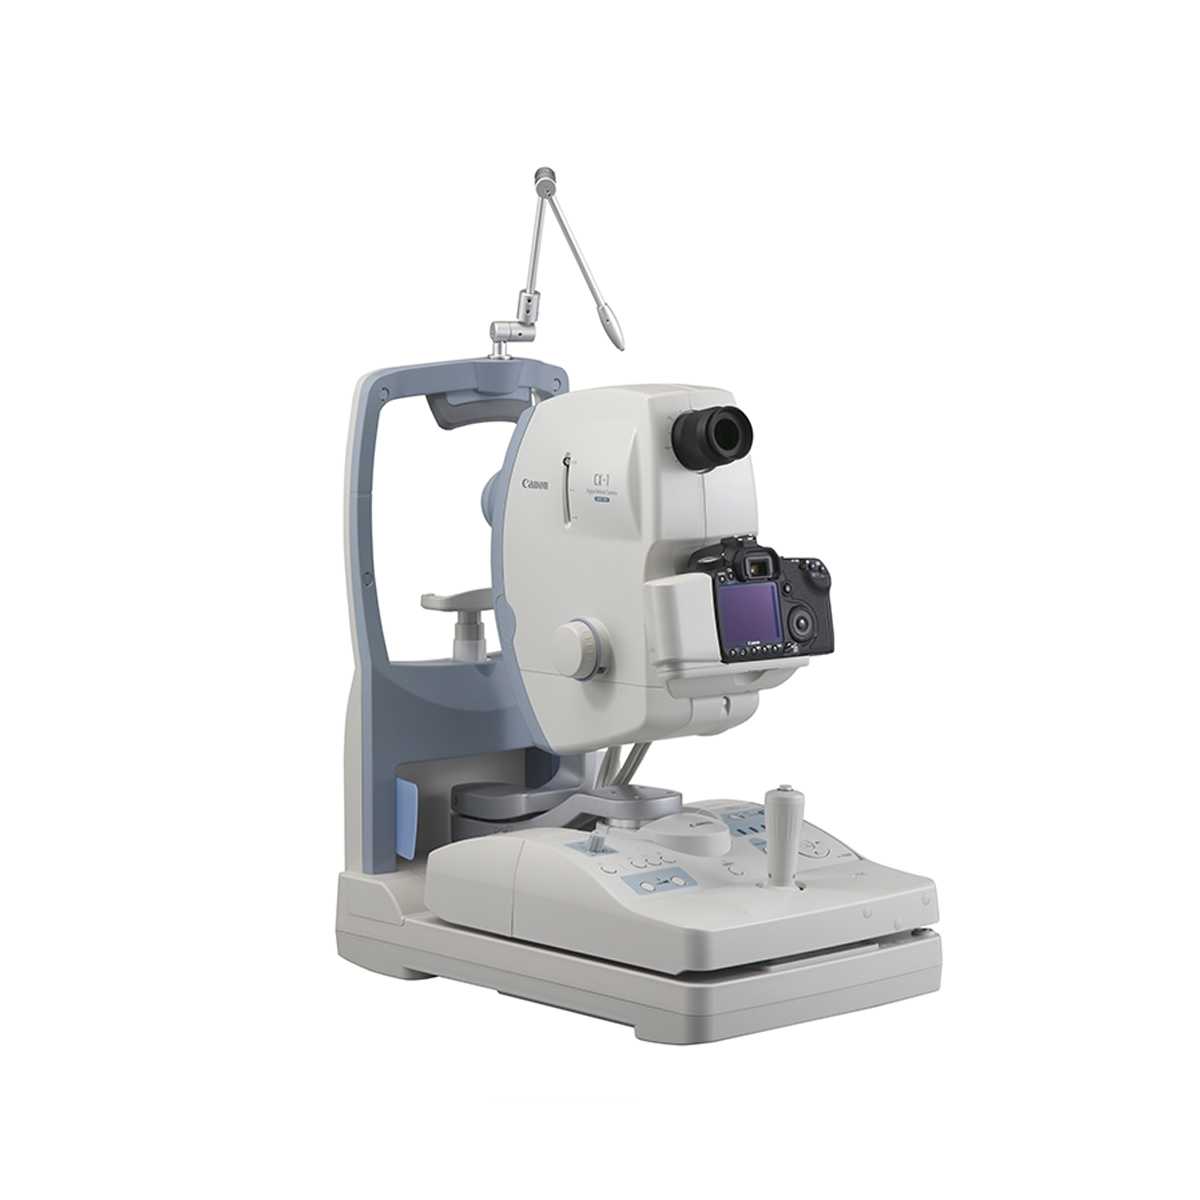 New Medical Electronic , Dental Equipment, and ophthalmic device